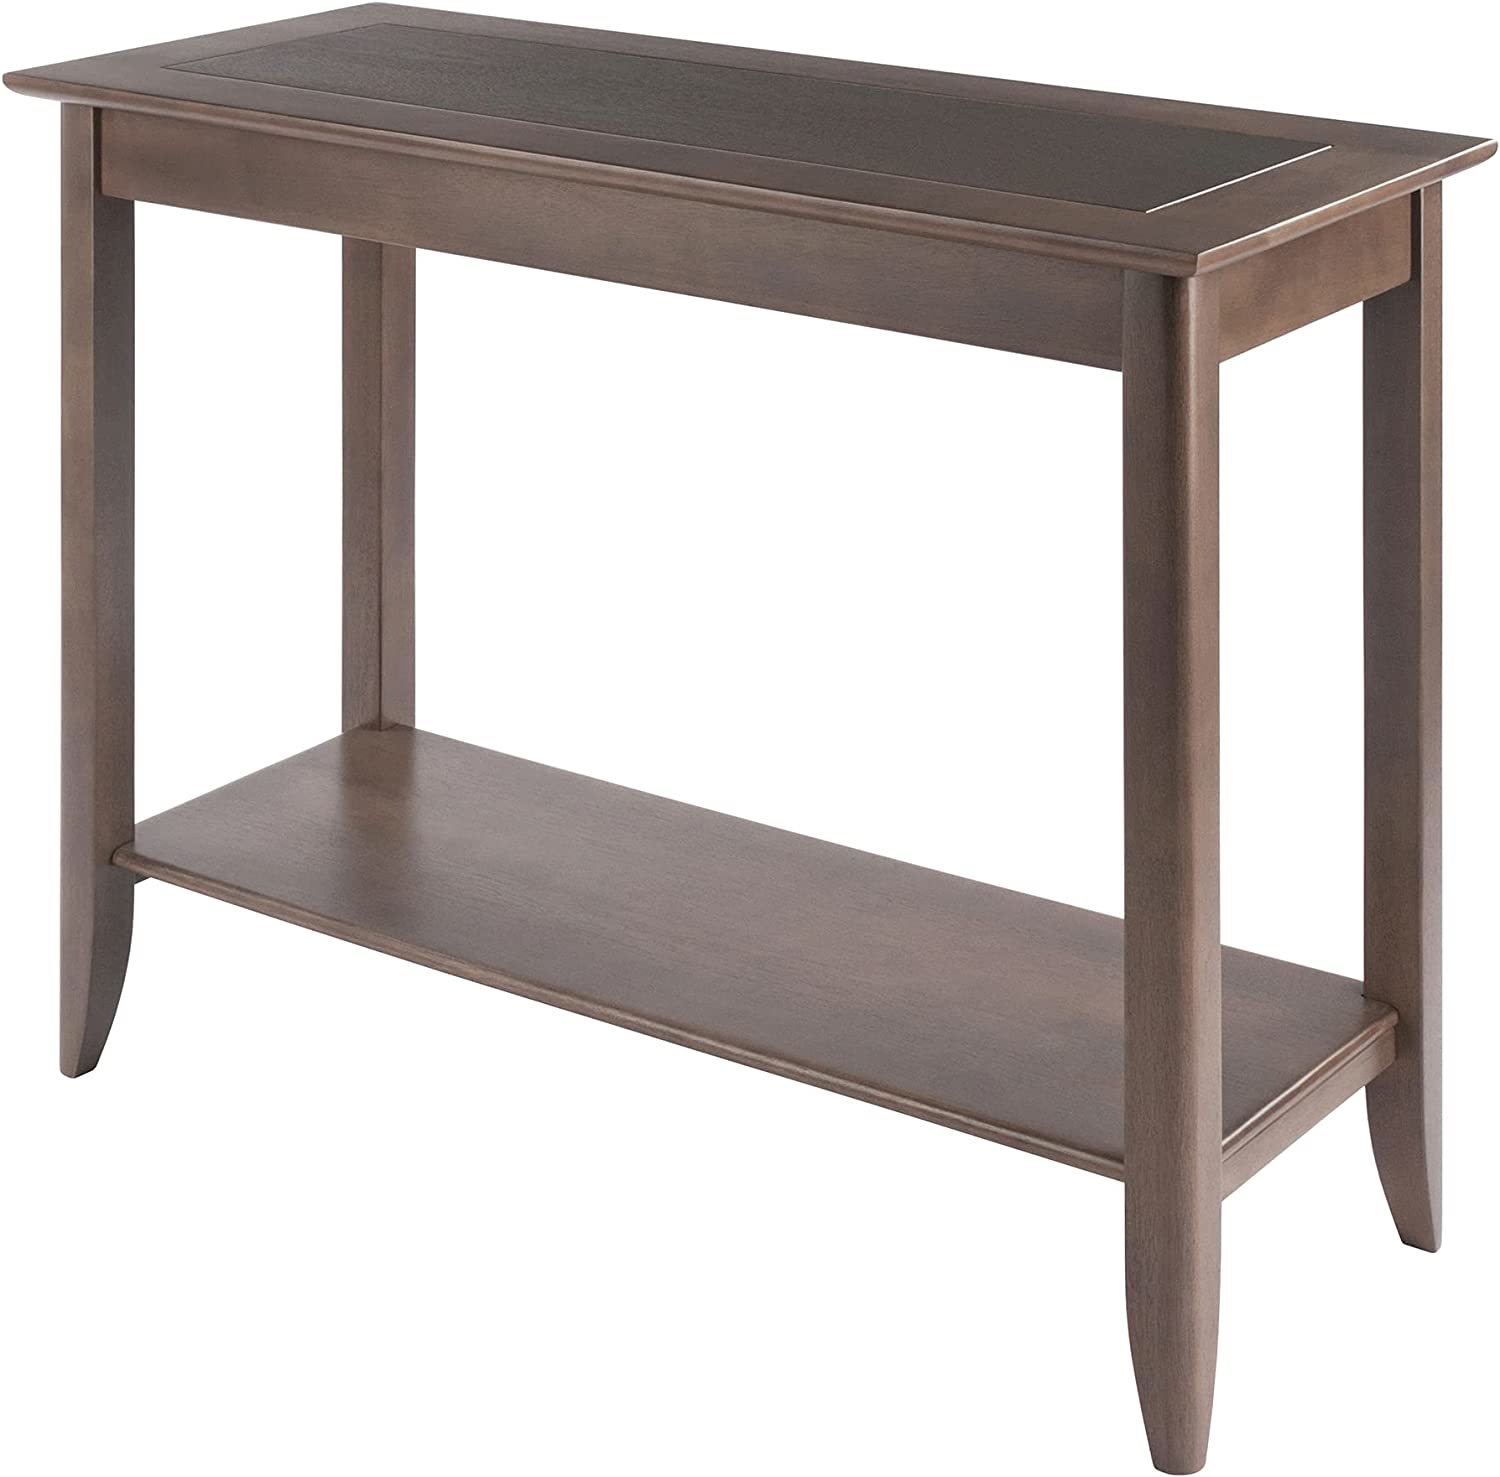 Oyster Gray Winsome 30 H Wood Santino Console Table - $111.94